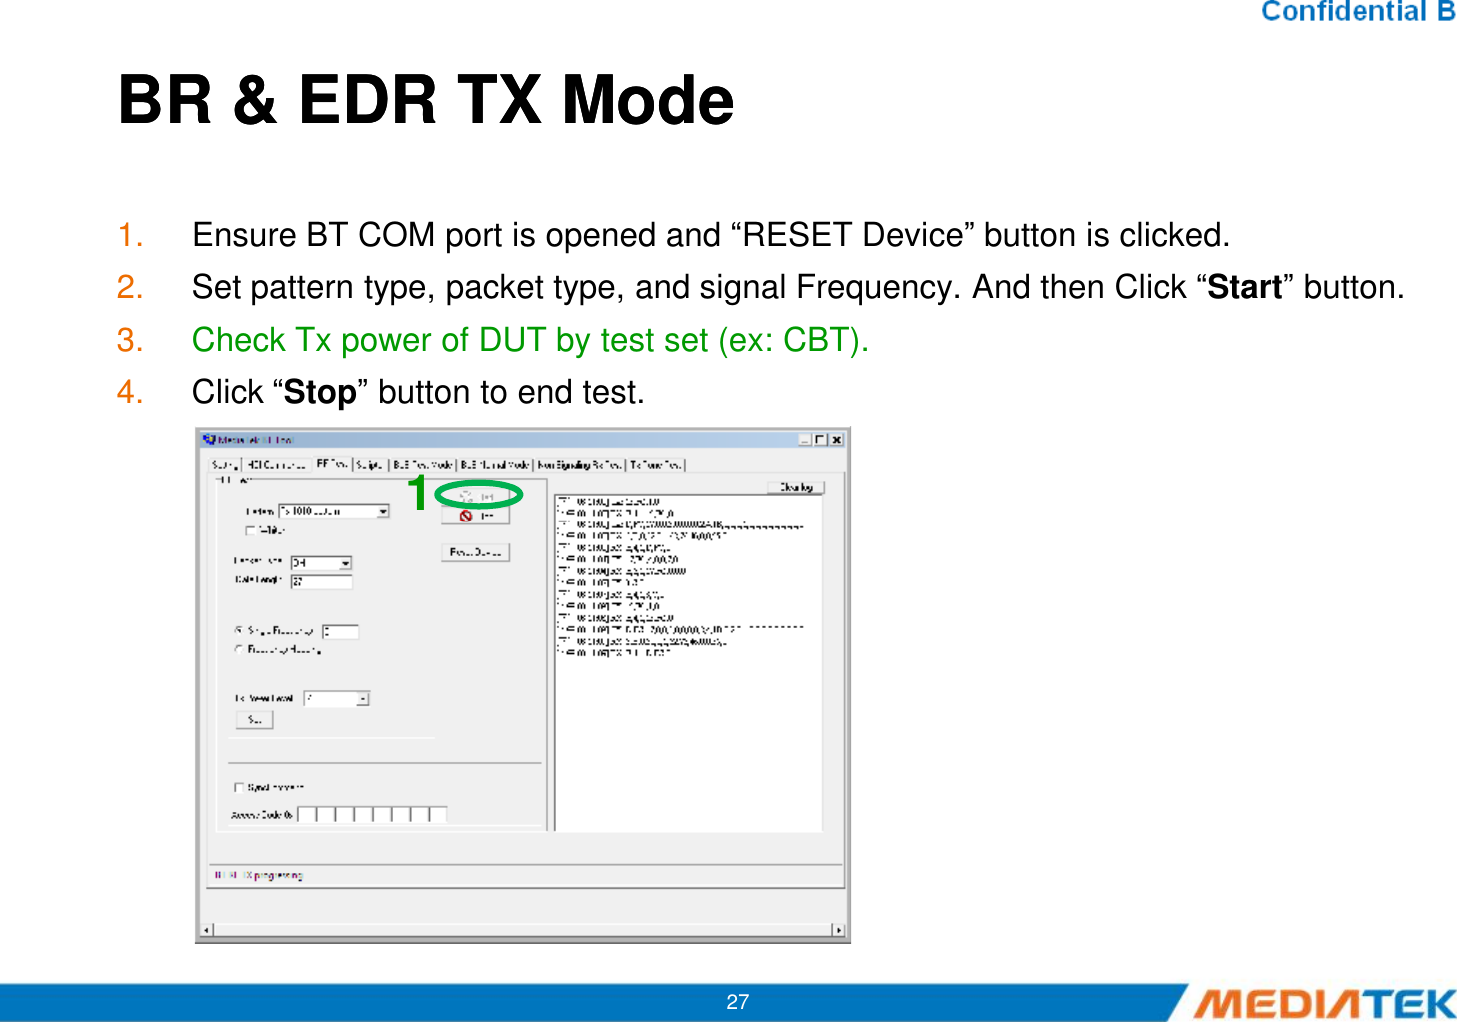 BR &amp; EDR TX ModeBR &amp; EDR TX Mode1. Ensure BT COM port is opened and “RESET Device” button is clicked.2. Set pattern type, packet type, and signal Frequency. And then Click “Start” button.3. Check Tx power of DUT by test set (ex: CBT).4. Click “Stop” button to end test.127